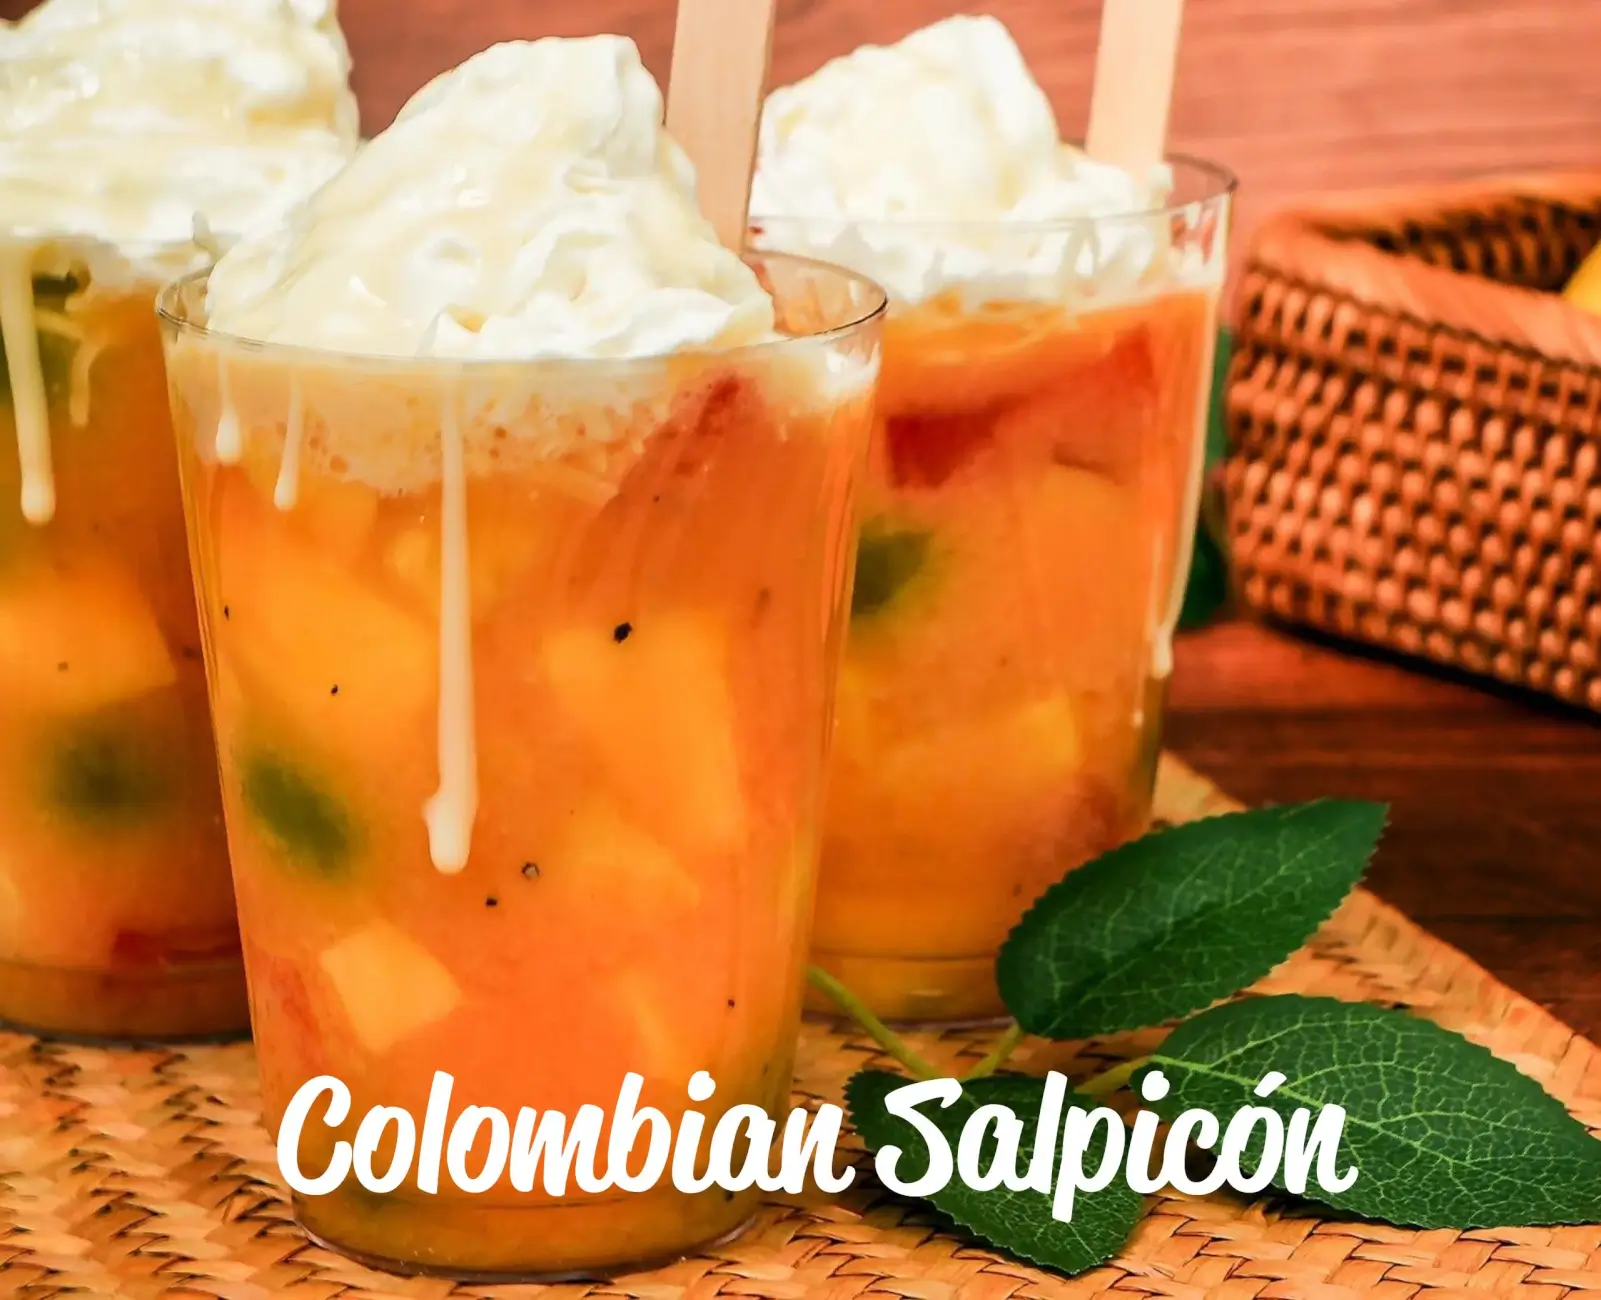 Sedanos Recipe Colombian Salpicon Shop online at Save Free Delivery at $55